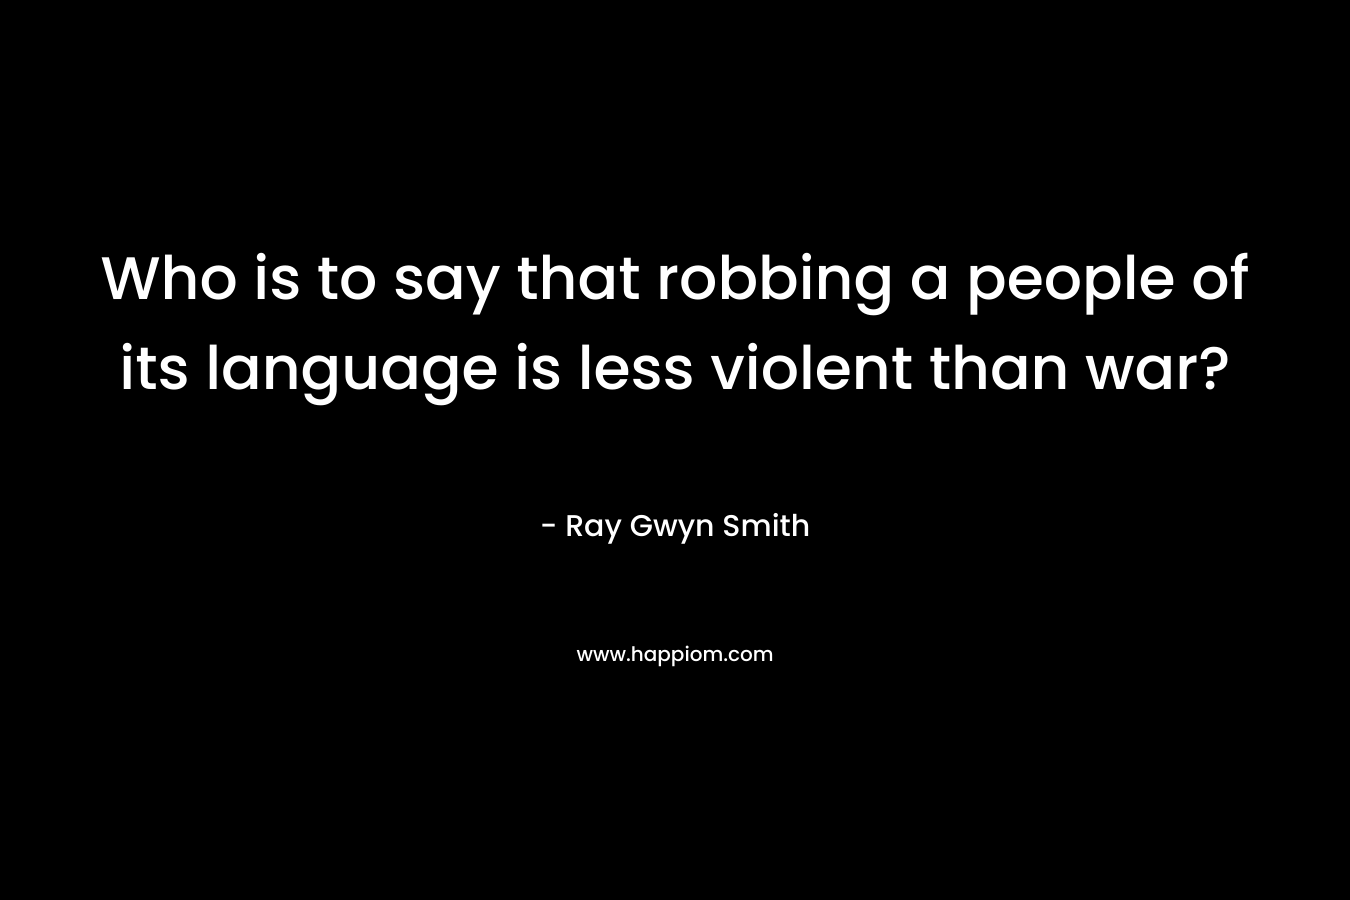 Who is to say that robbing a people of its language is less violent than war?